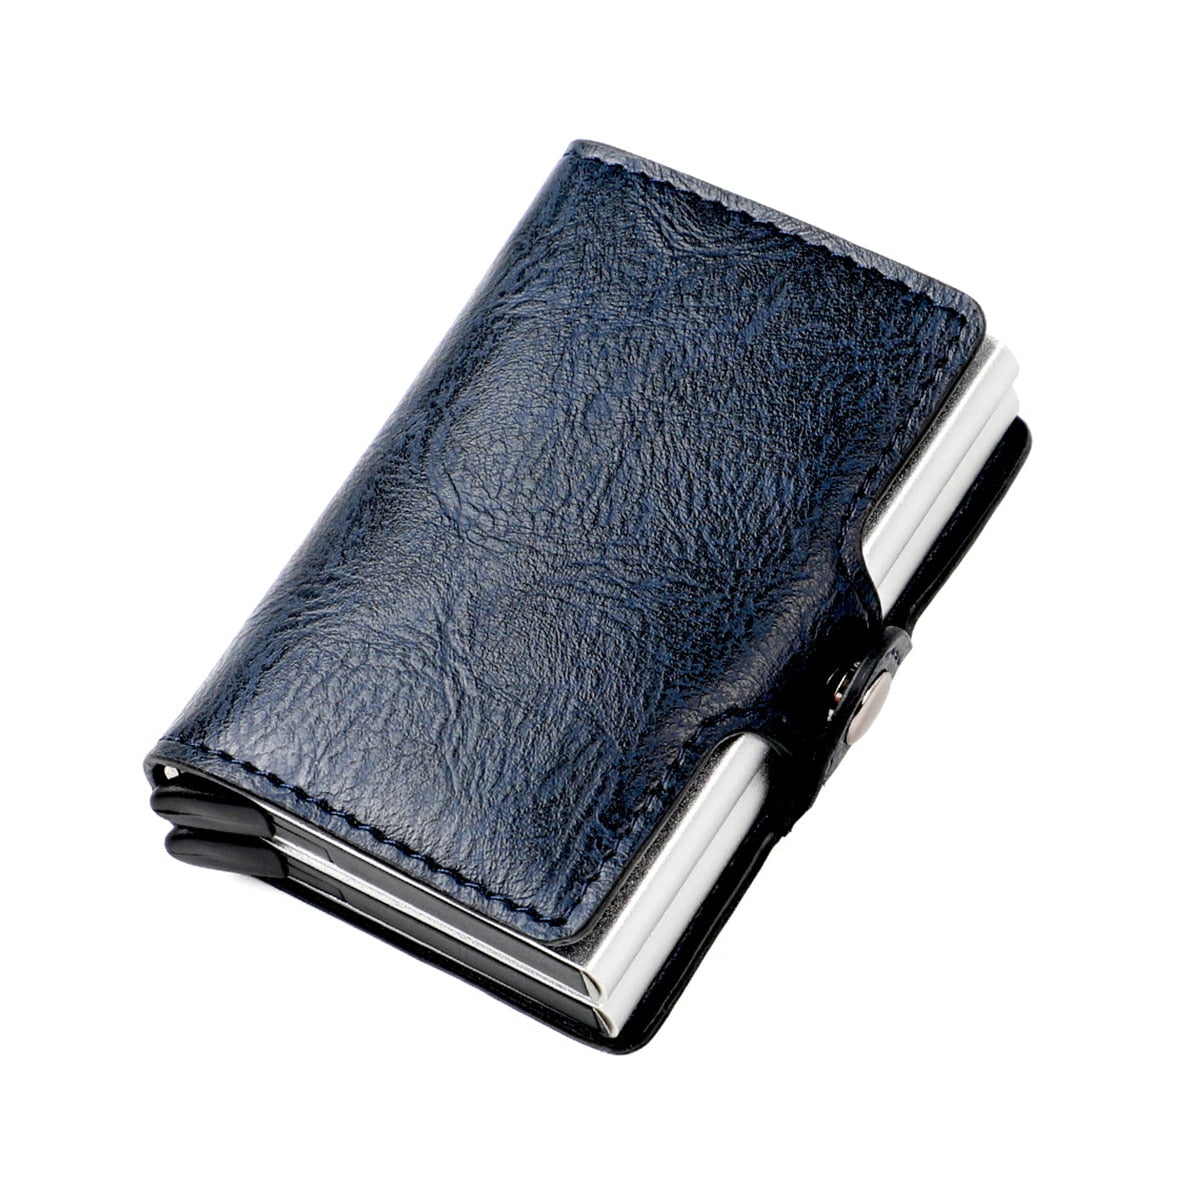 New Men Rfid Anti-theft Card Holders Women Genuine Leather Wallets Large Capacity Business Card Case Portable Double Layer Purse